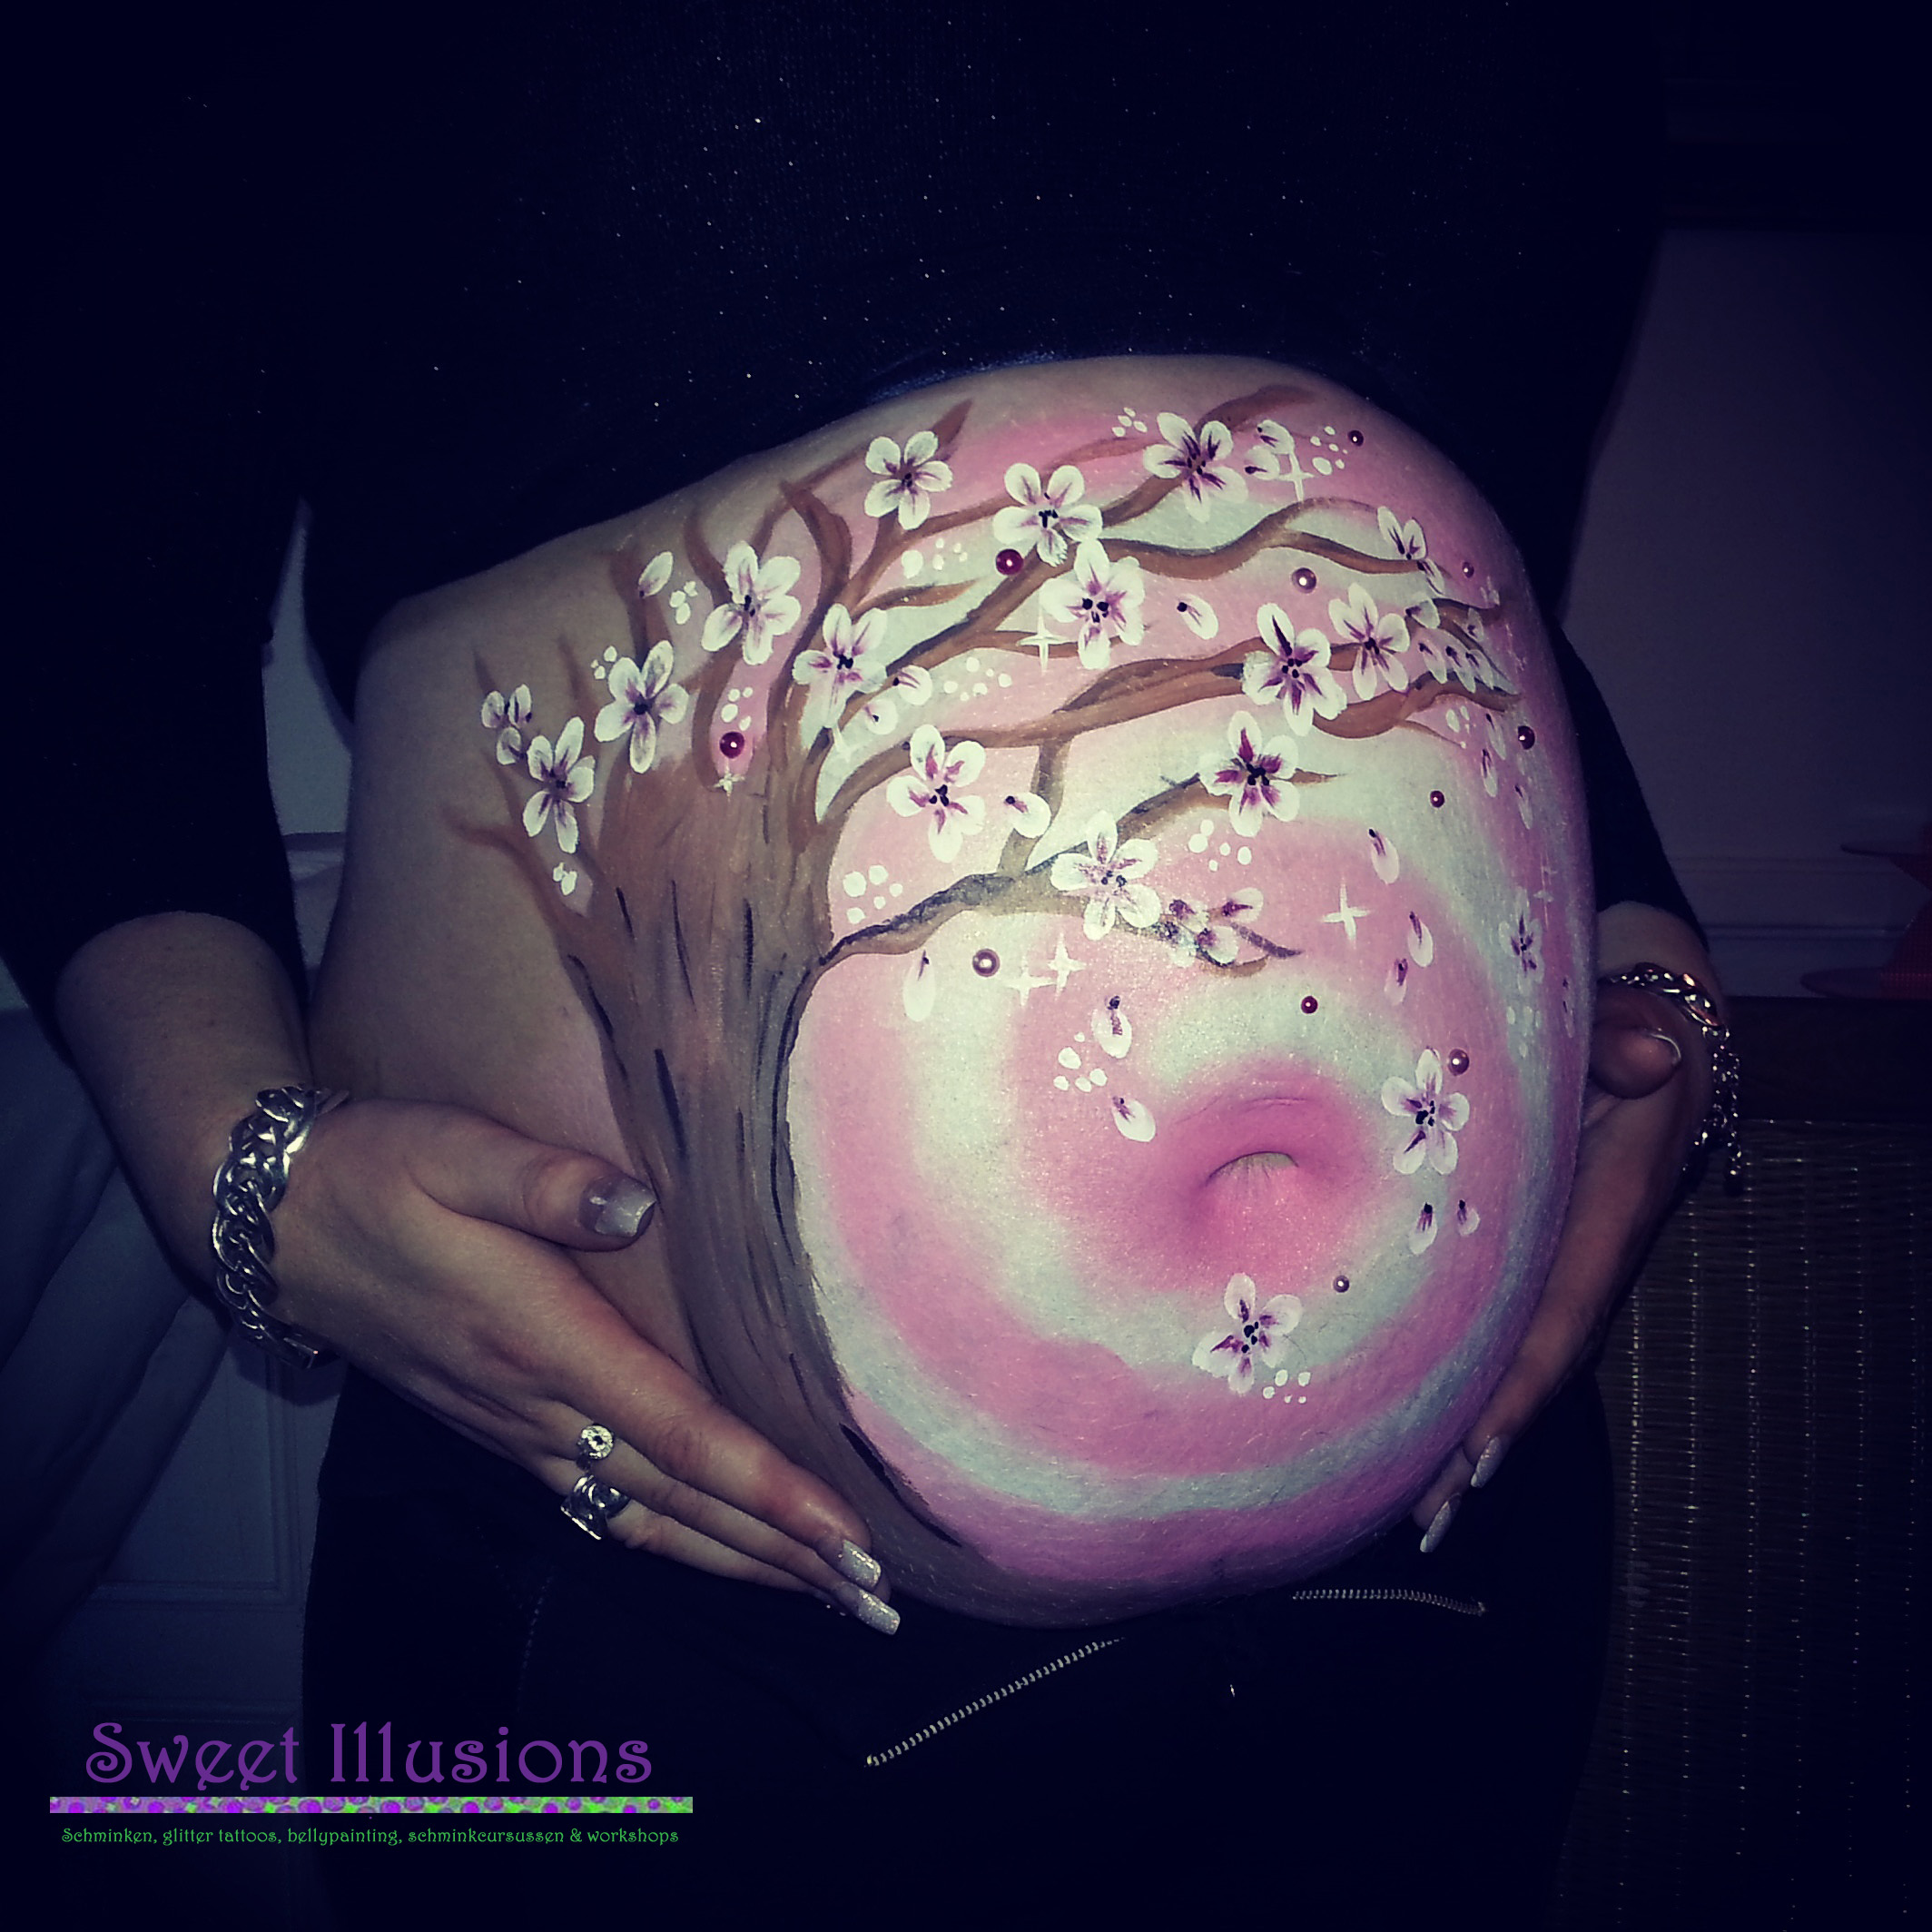 Bellypainting Sweet Illusions